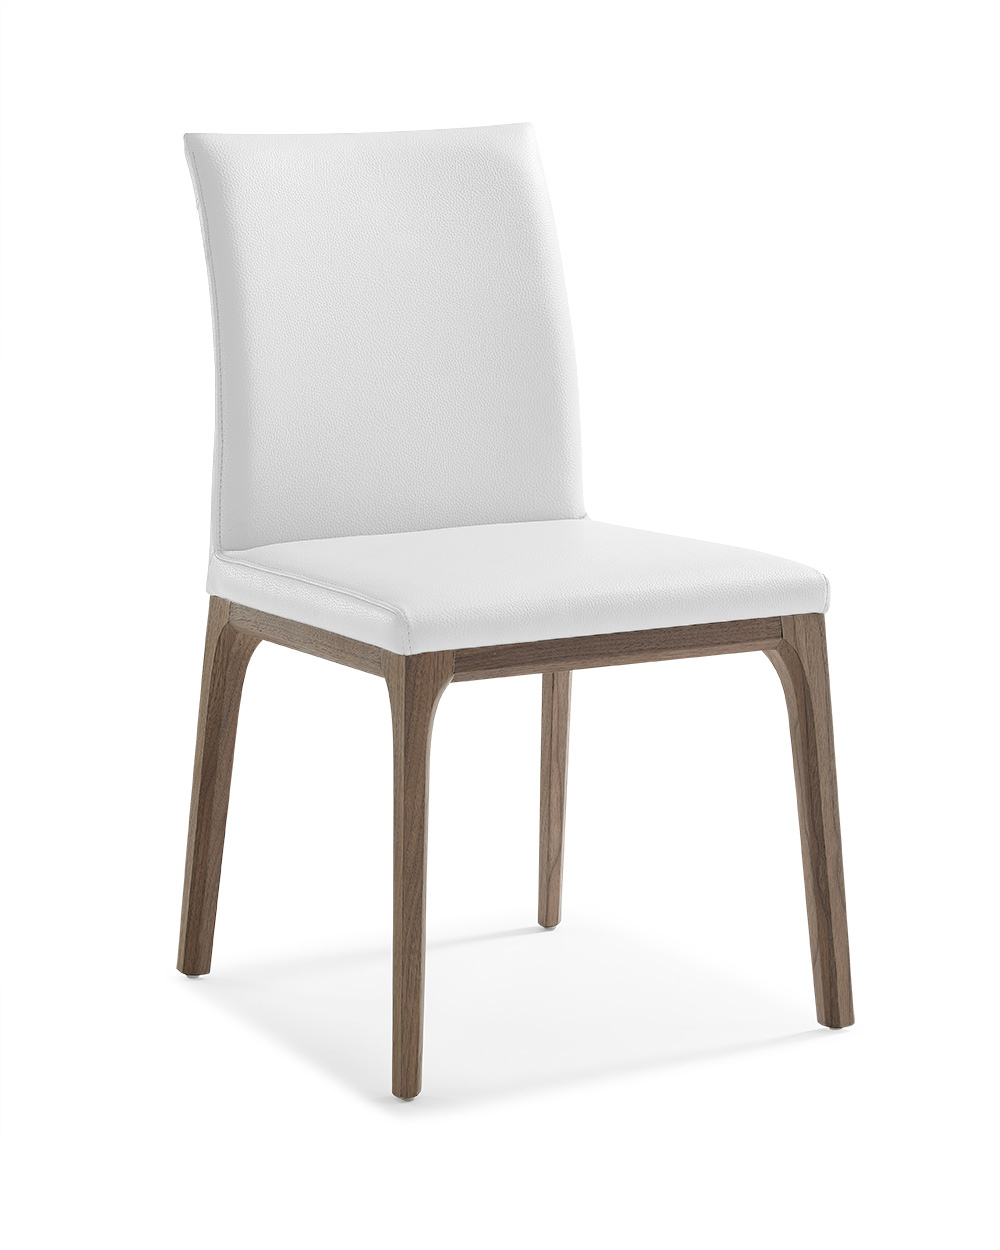 20" X 24" X 35" White Faux Leather or Metal Dining Chair